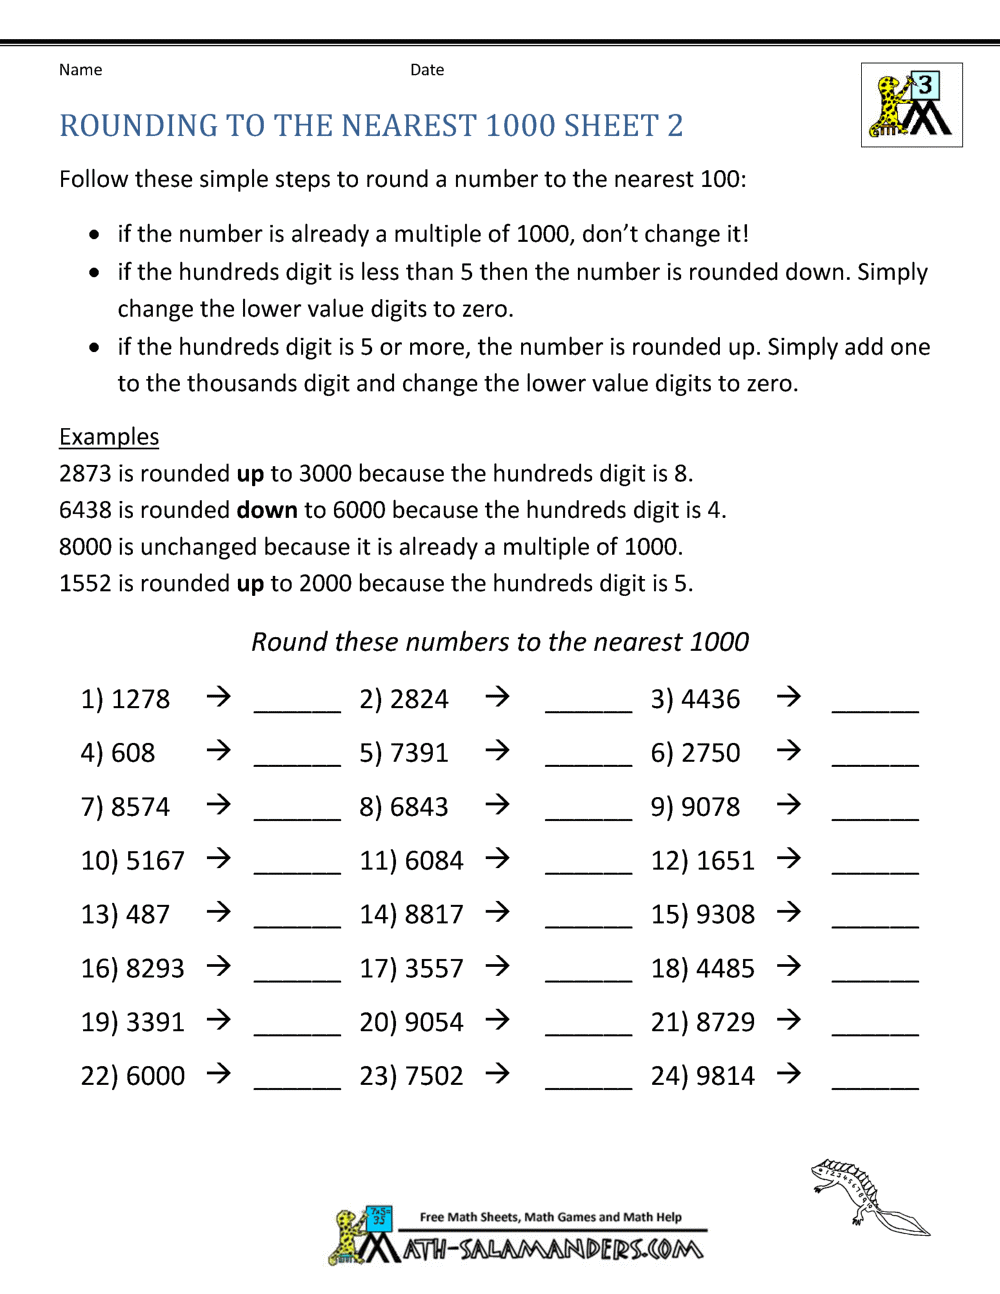 Rounding Worksheet to the nearest 1000